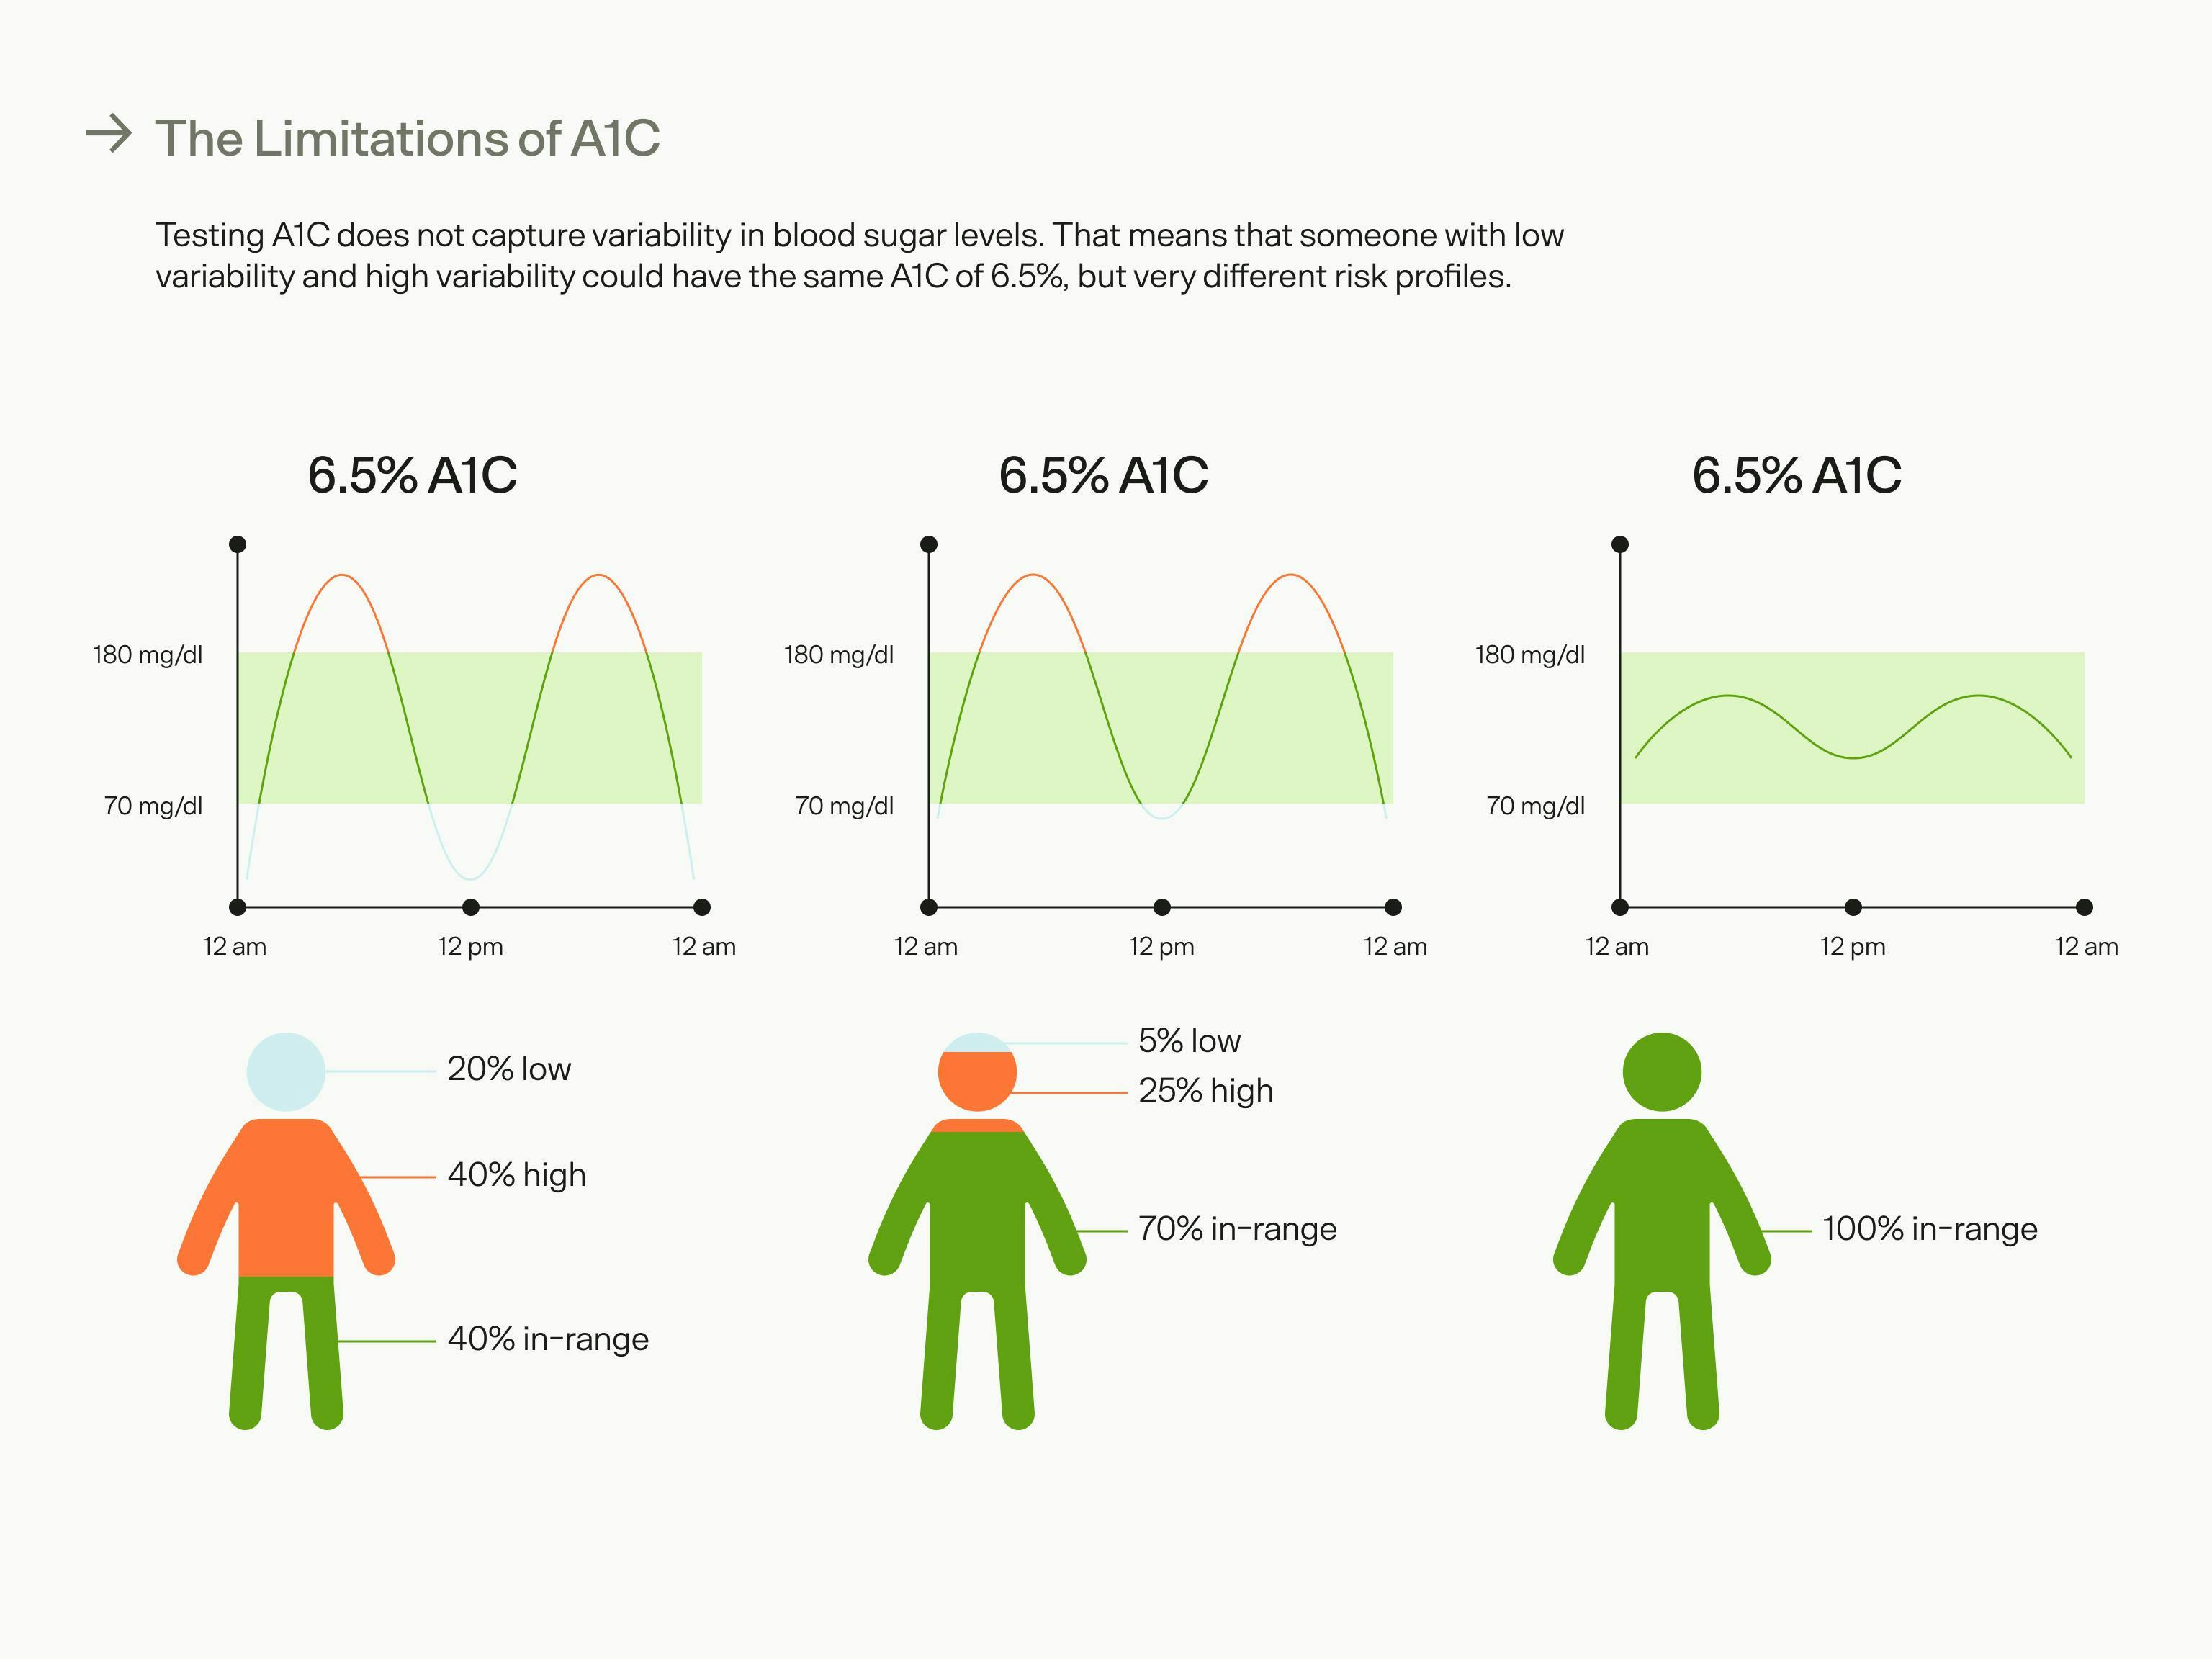 limitations of a1c graphic